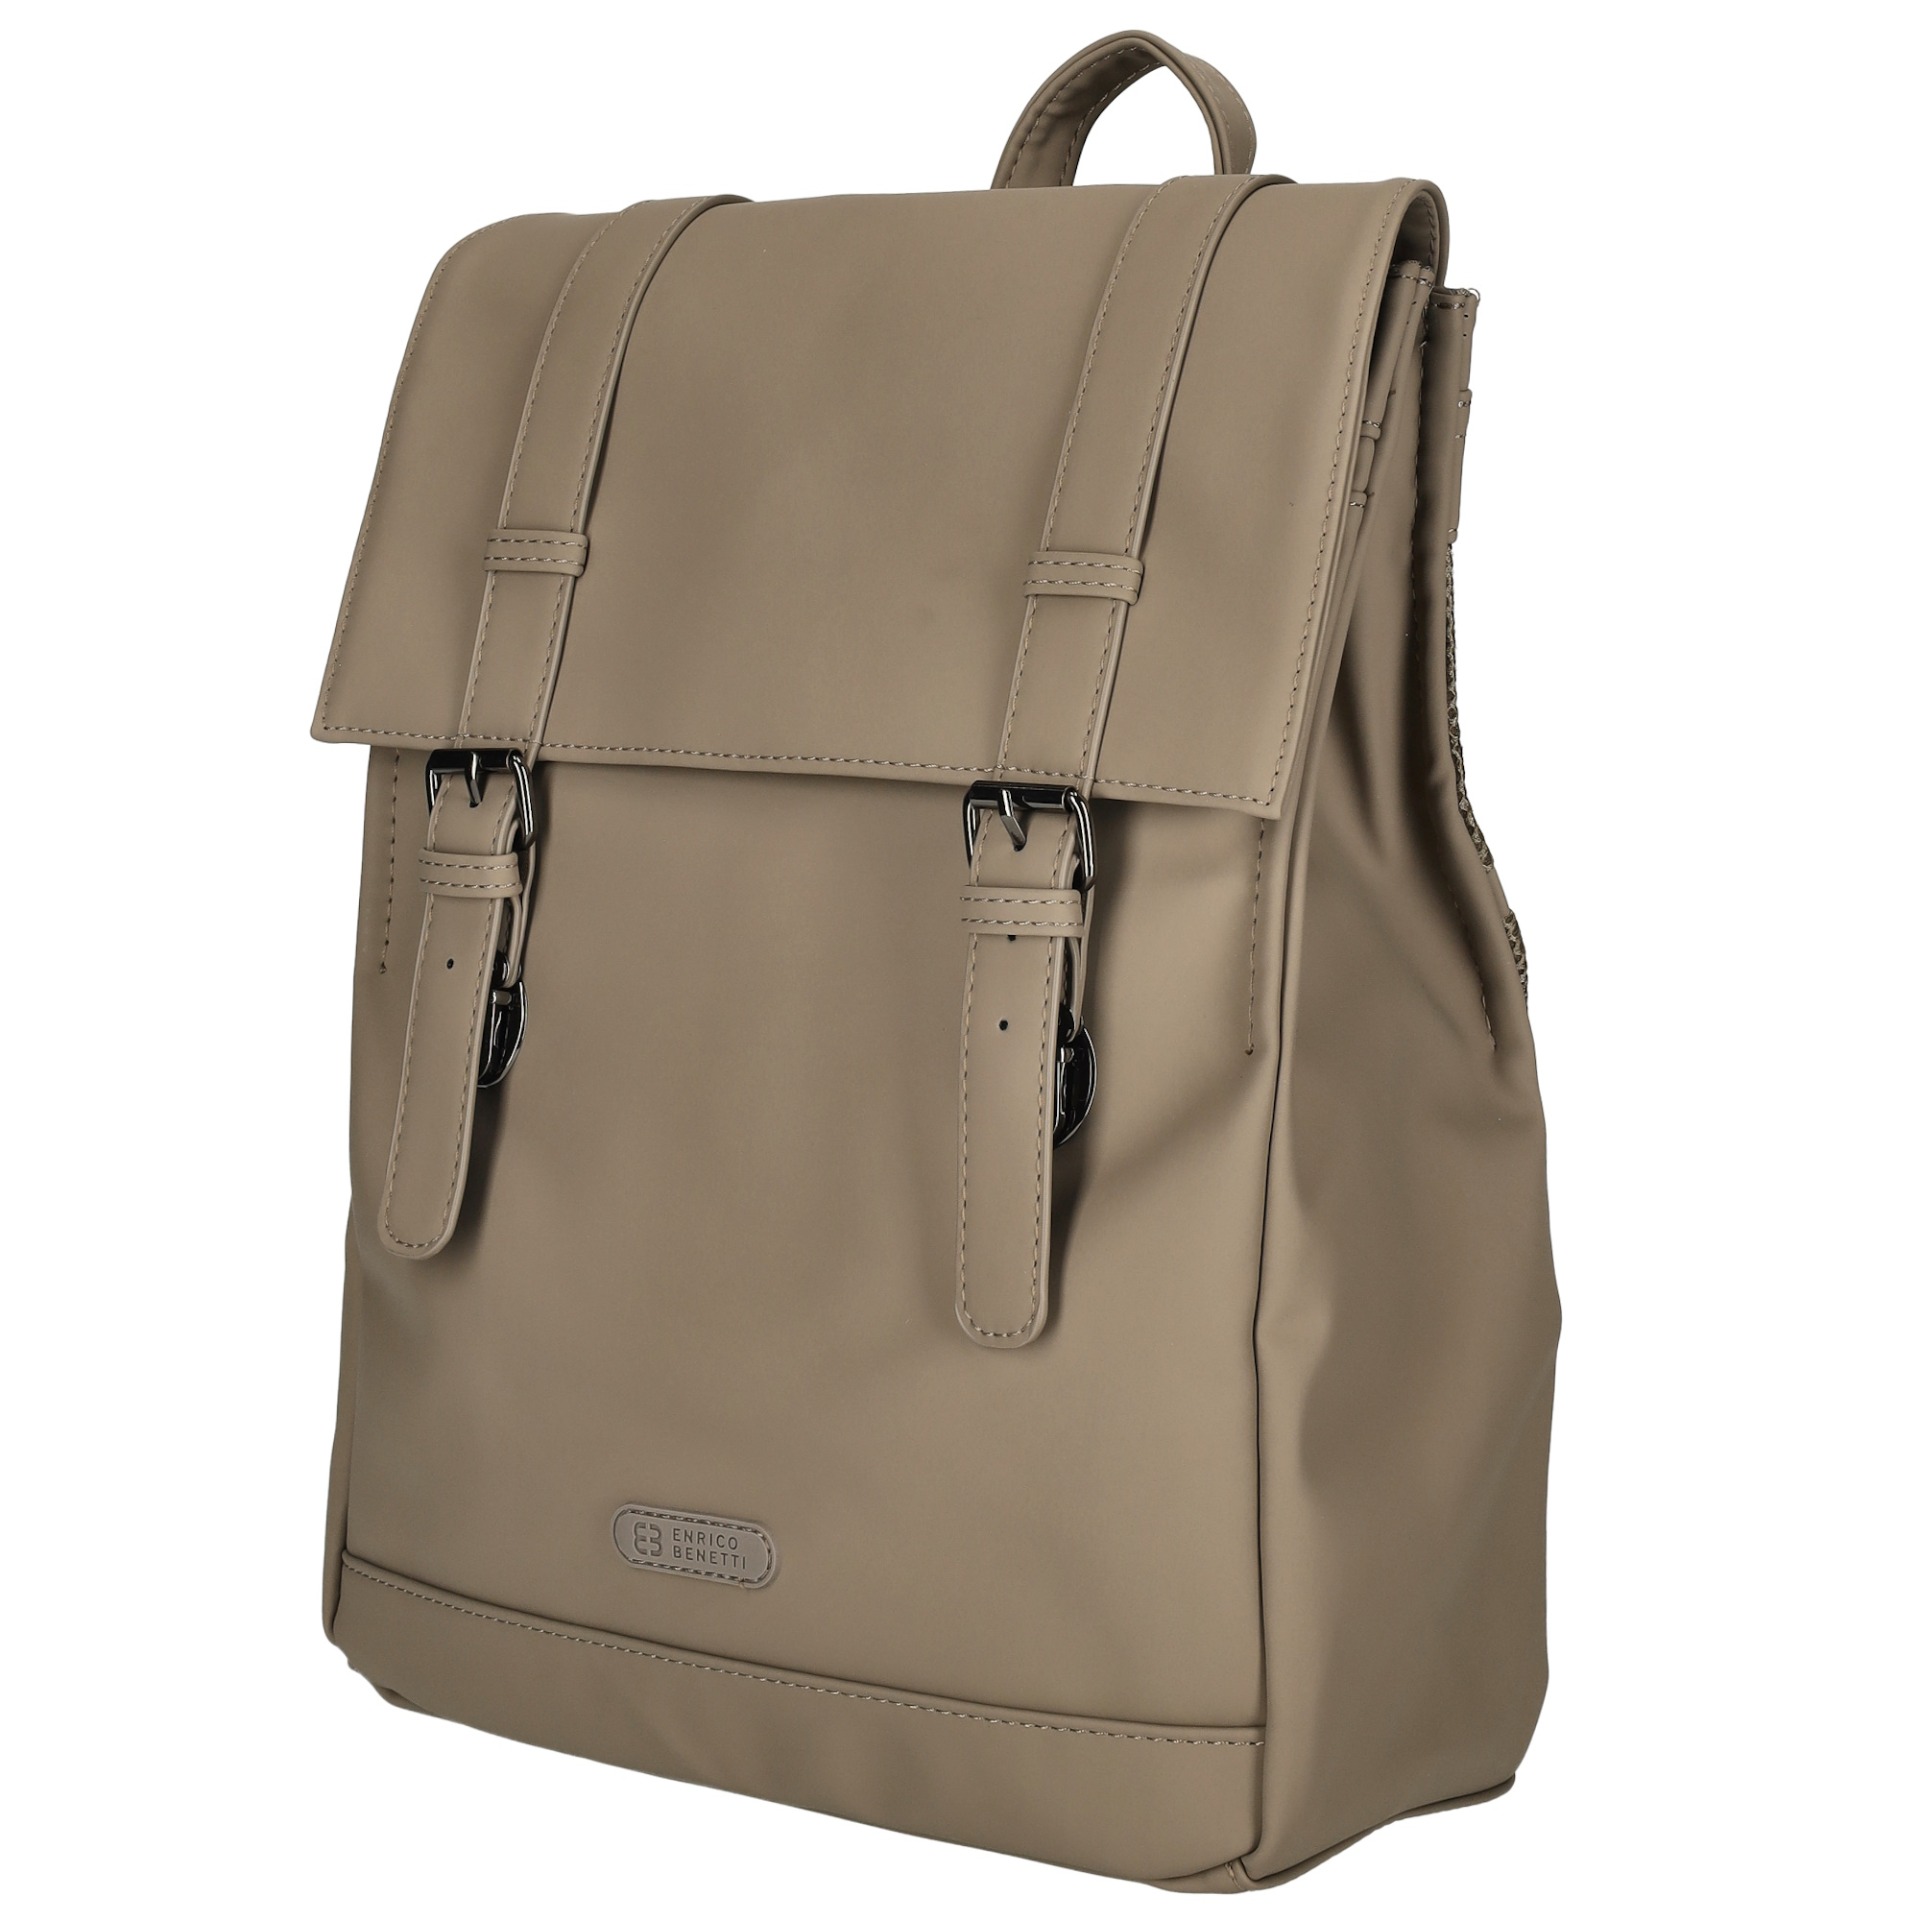 E-shop Enrico Benetti Maeve Tablet Backpack Taupe